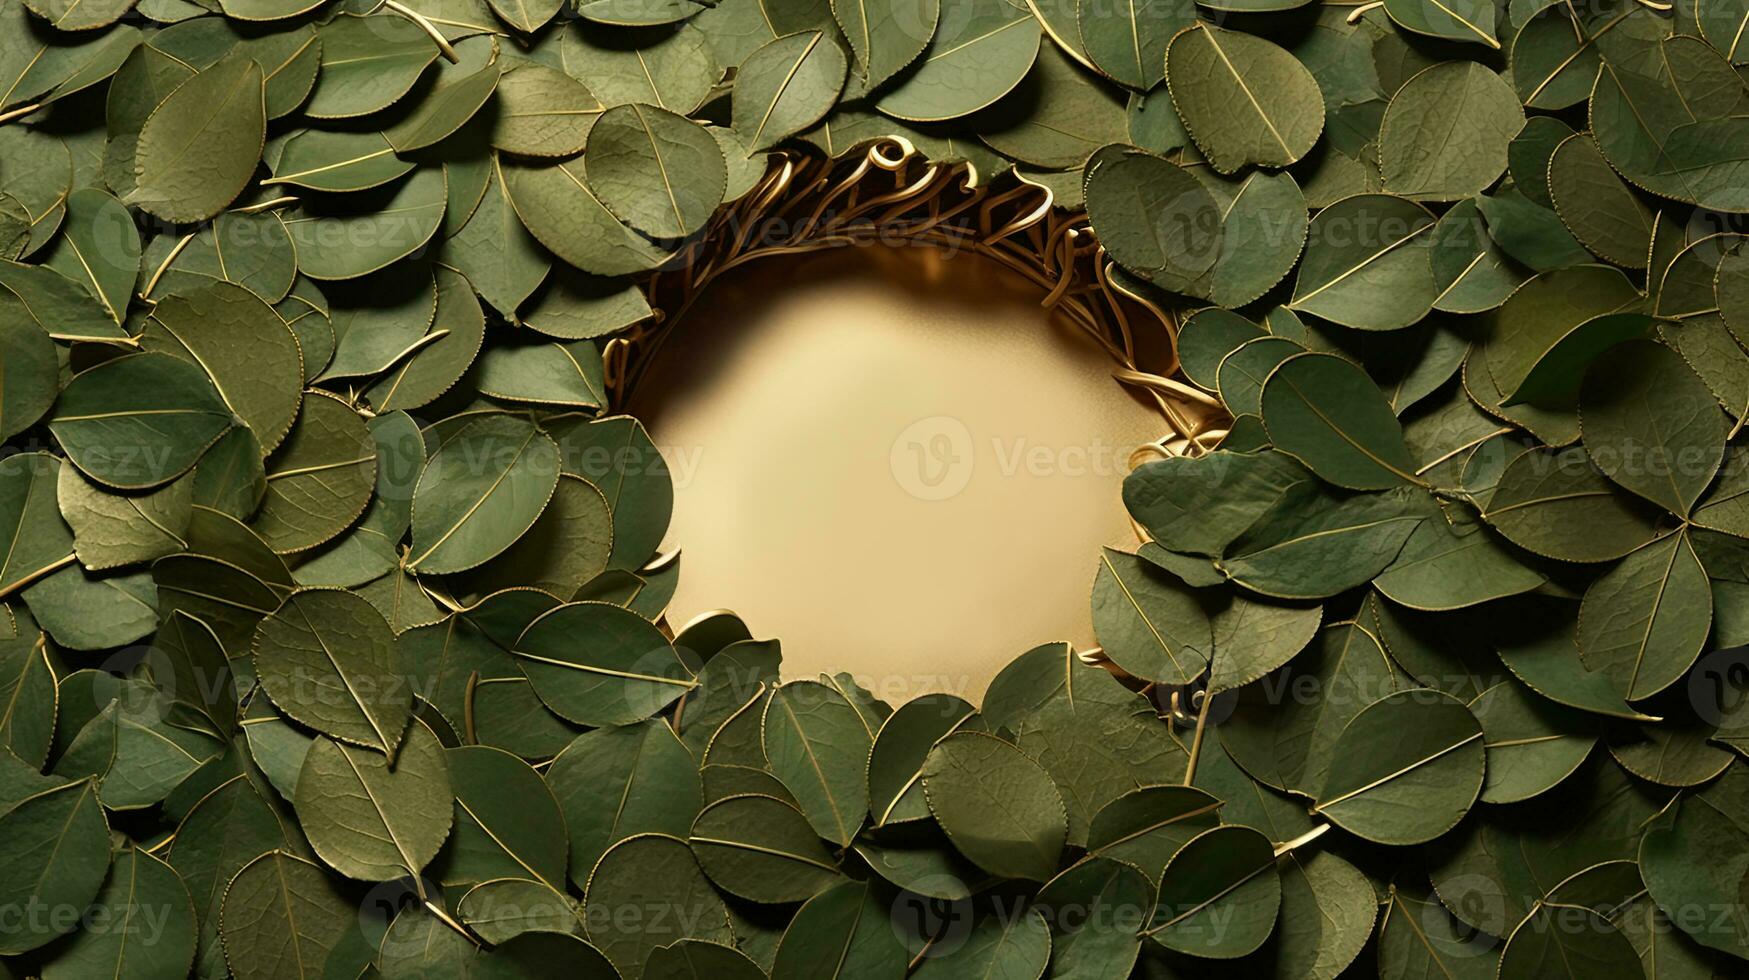 Tropical Green and Red Leaves Tree Branch with Circle Golden Frame for Backdrop. Creative Jungle or Forest Nature Background. photo